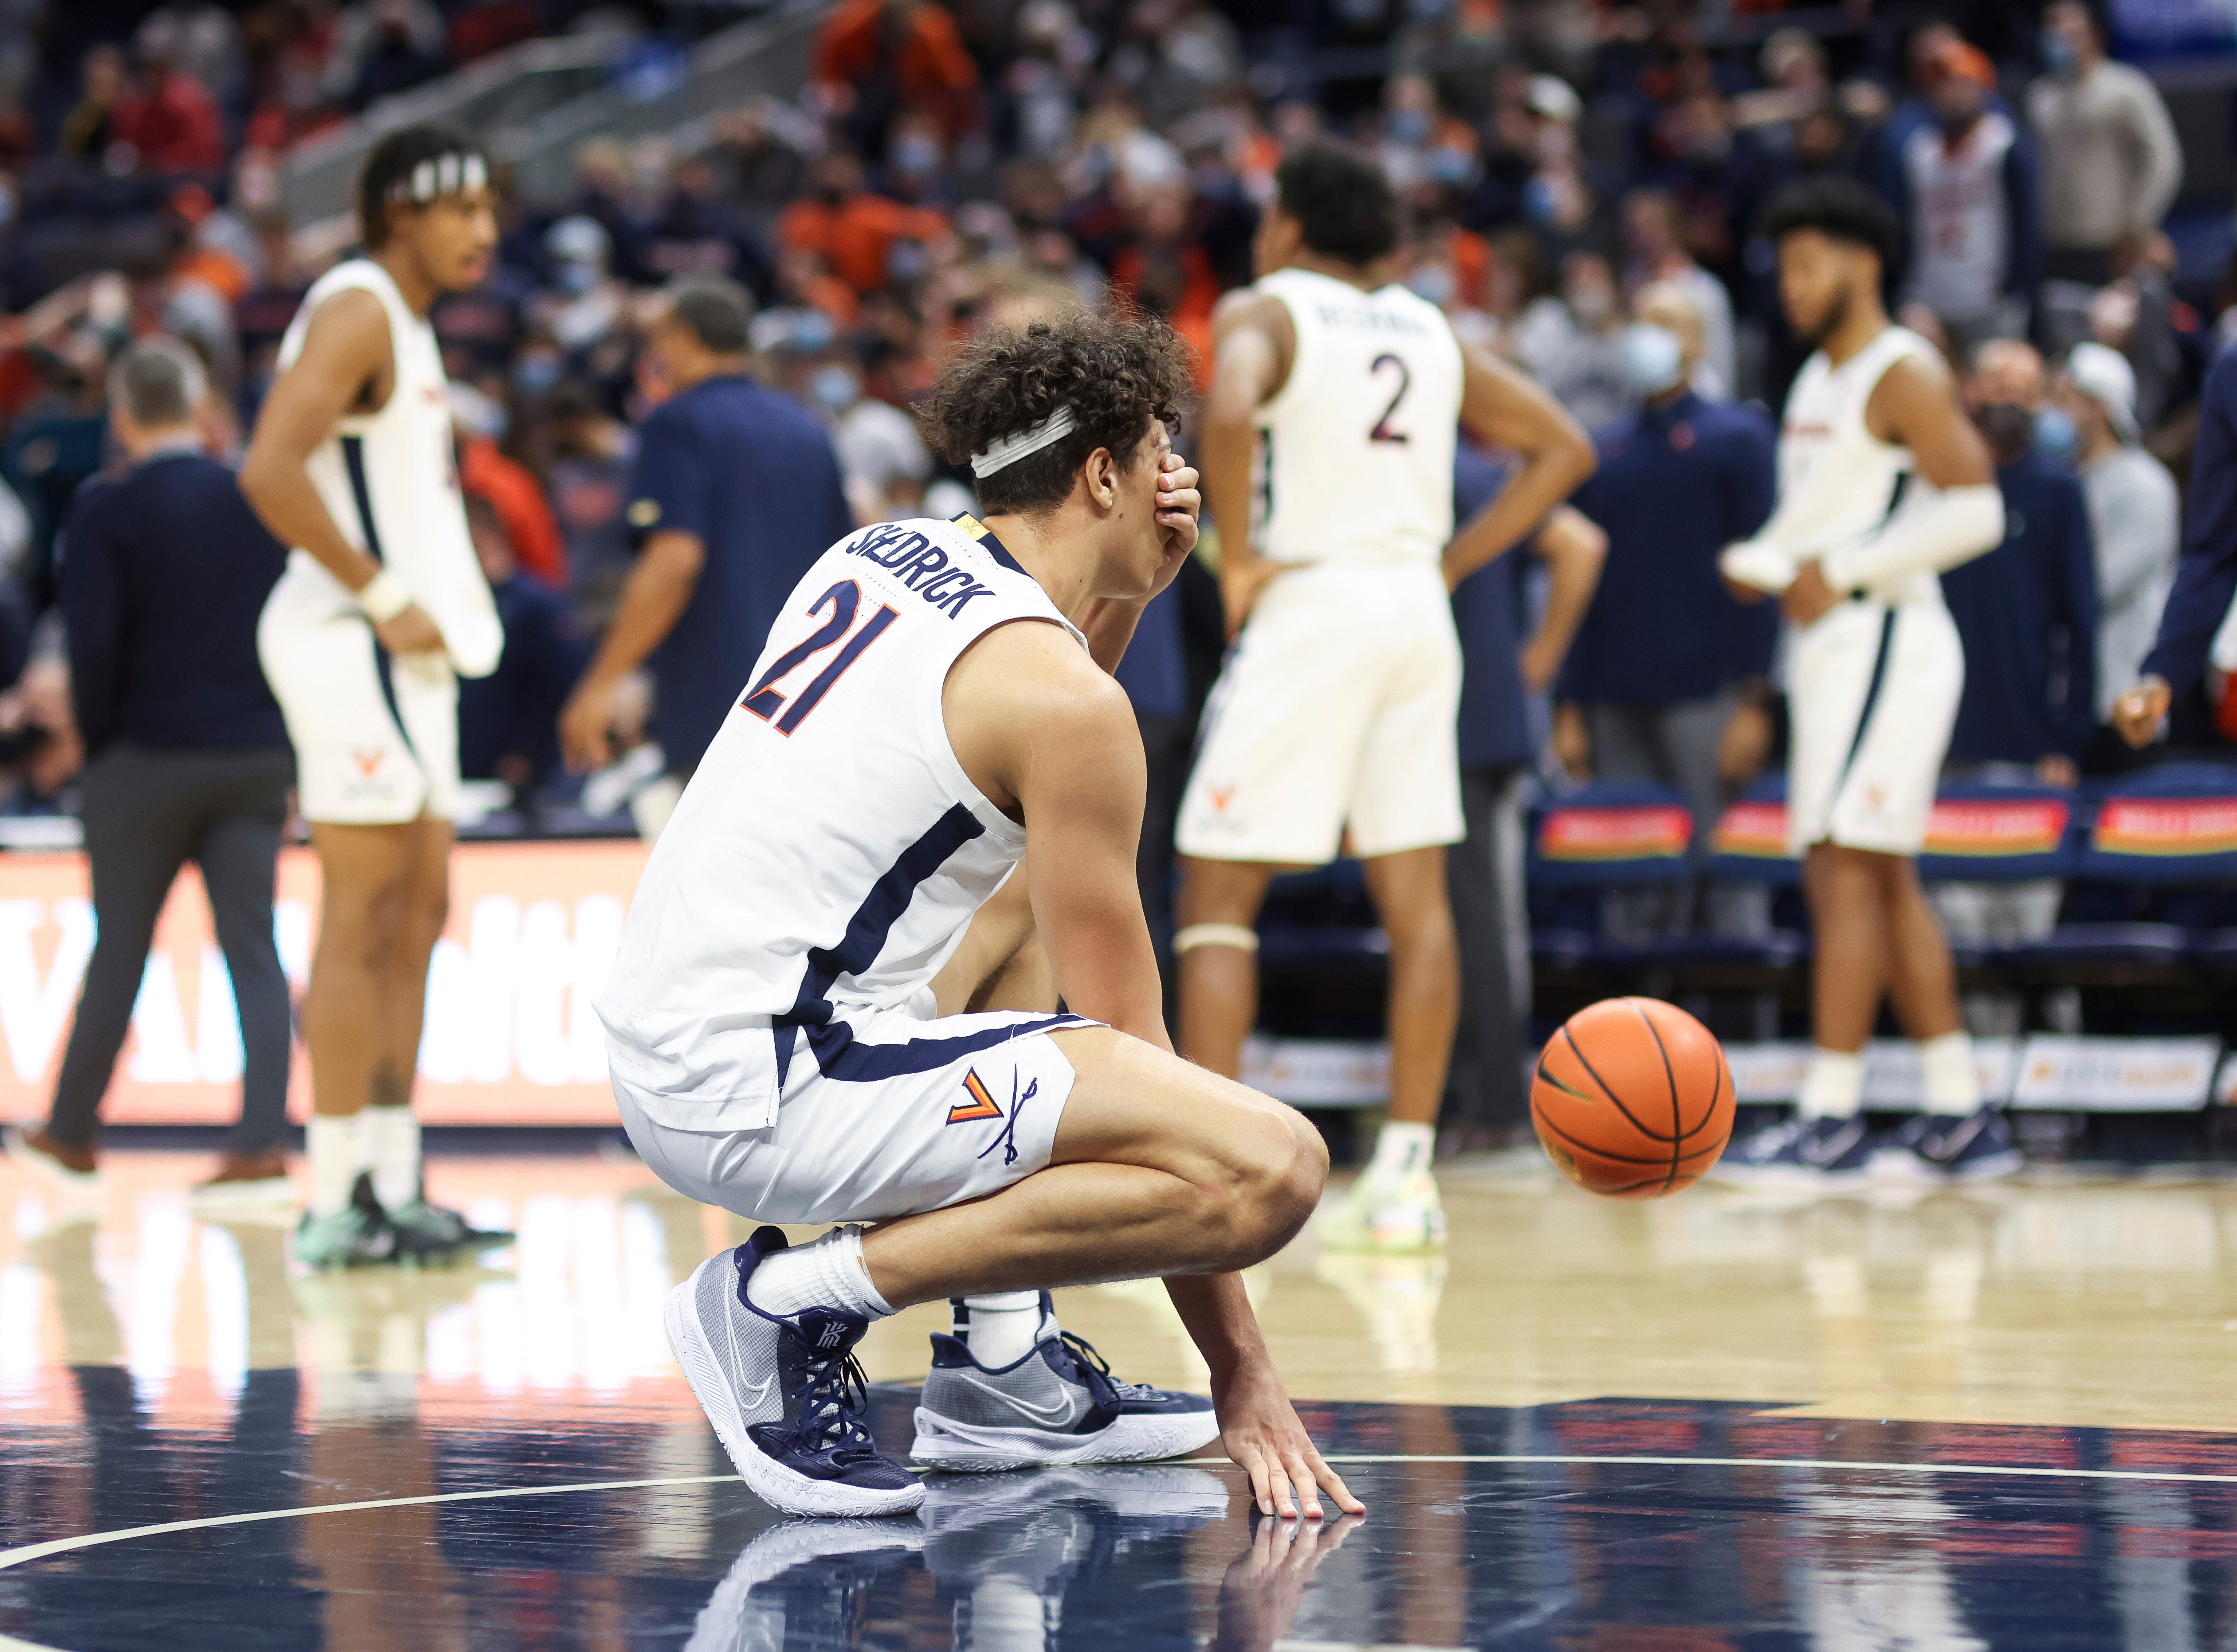 Virginia forward Kadin Shedrick (21) reacts to losing to Iowa after an NCAA college basketball game, Monday, Nov. 29, 2021, in Charlottesville, Va.